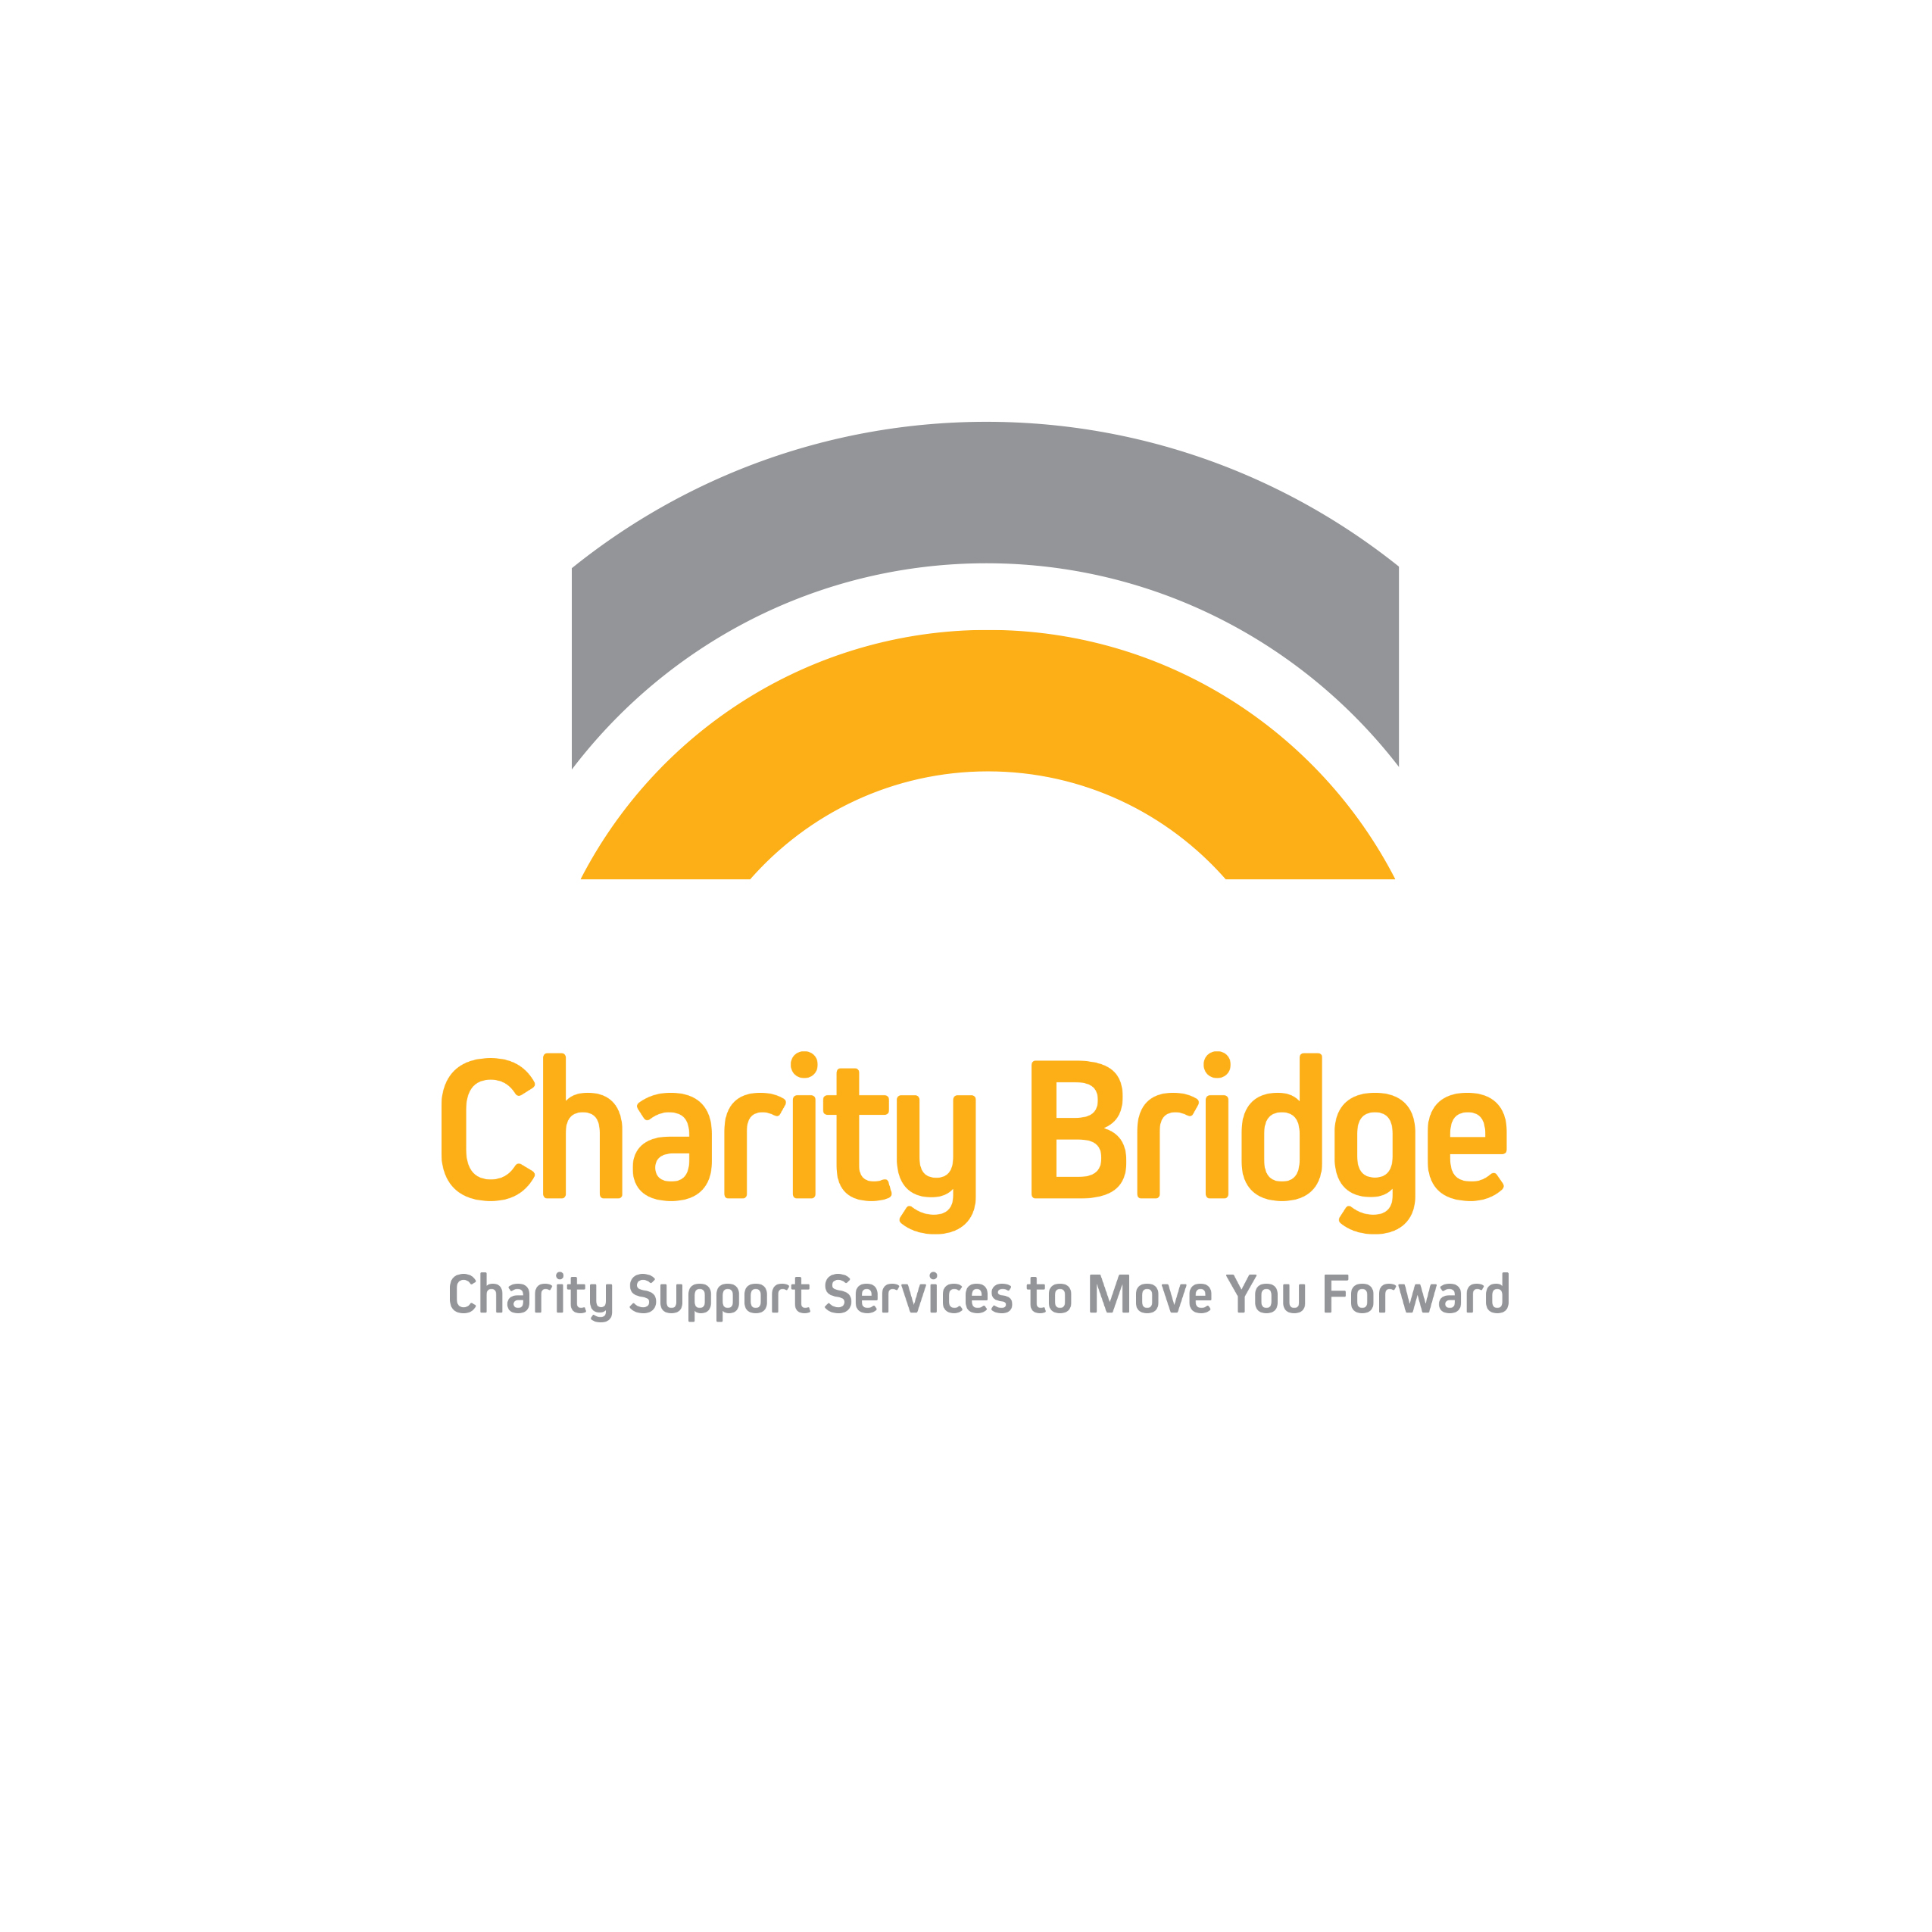 Charity Bridge logo design by logo designer Yellow Pencil Brand Sharpening for your inspiration and for the worlds largest logo competition